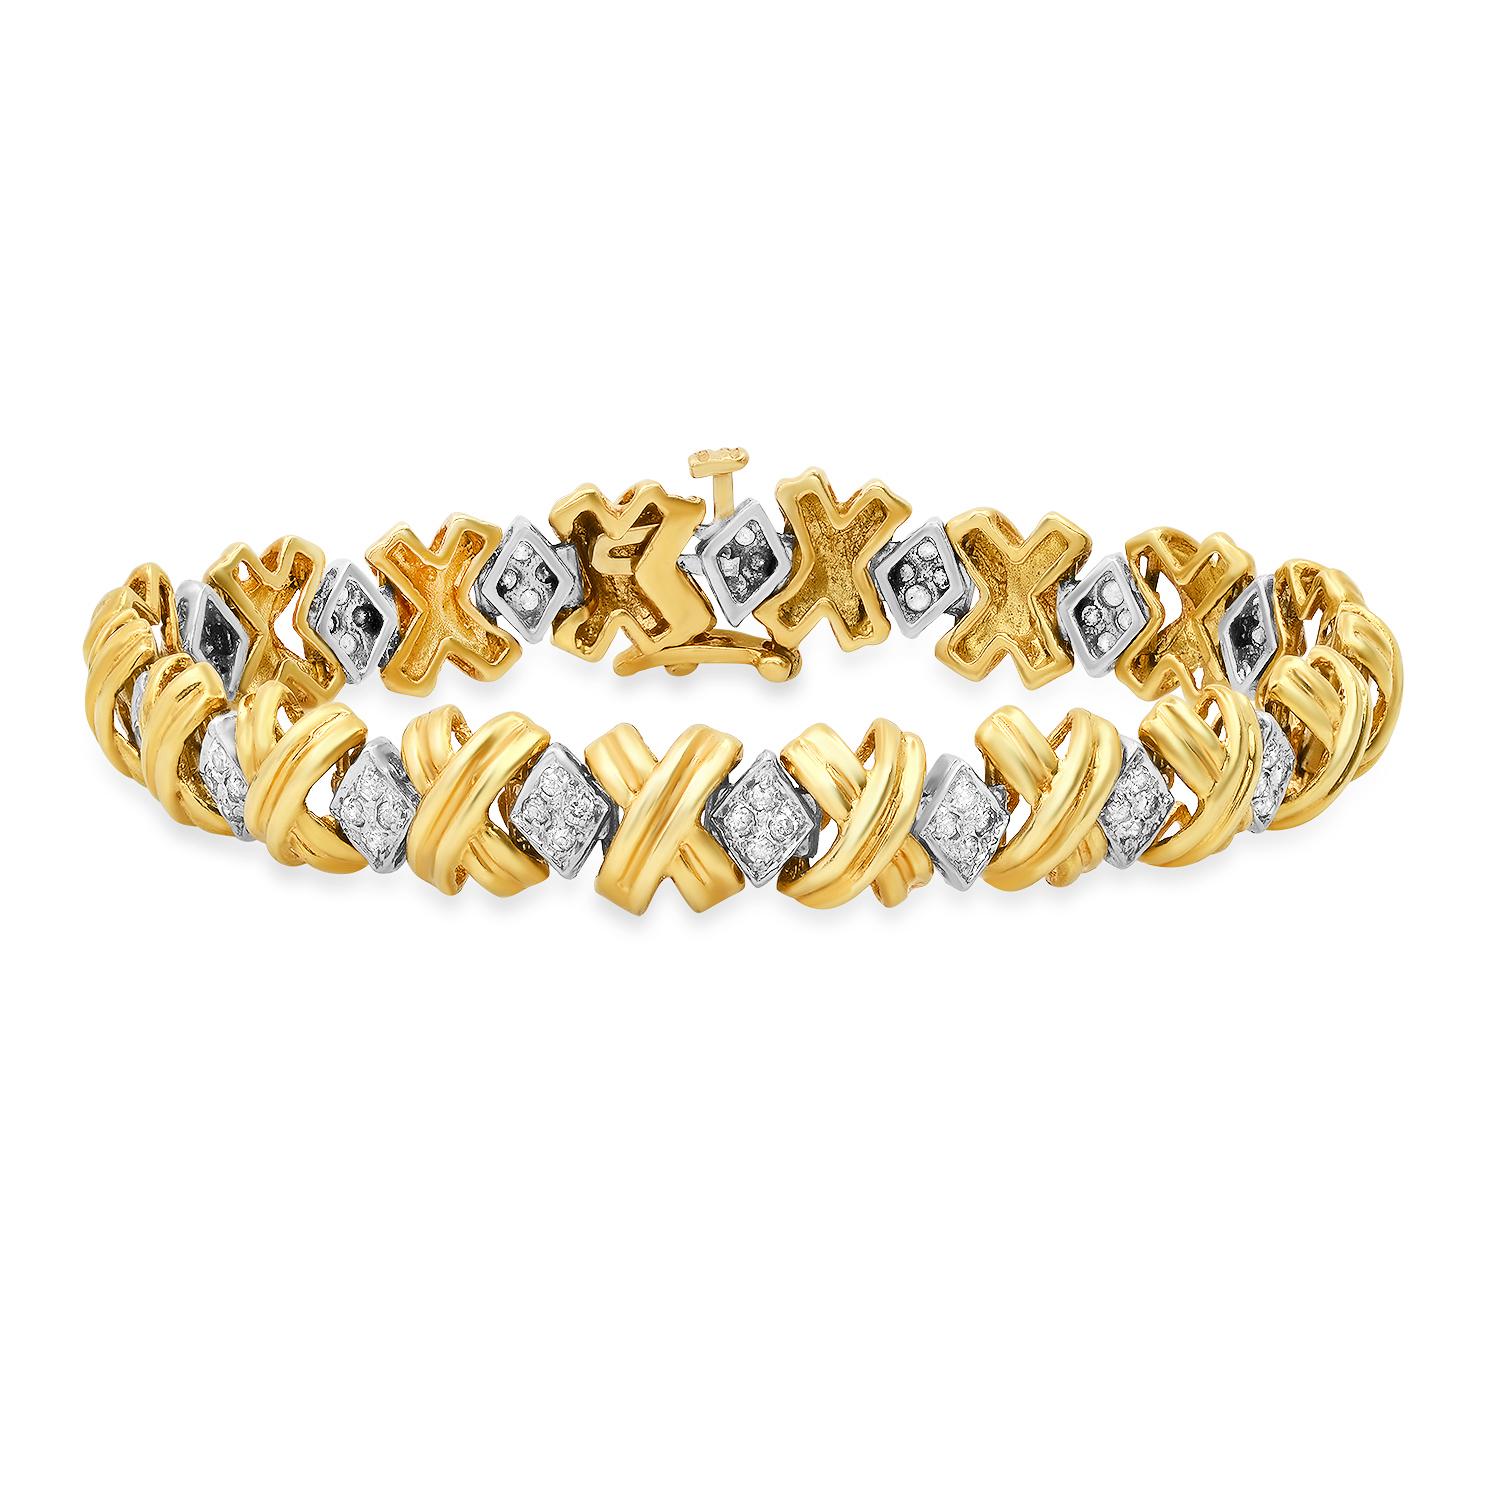 14K Yellow and White Gold Setting with 1.08ct Diamond Bracelet